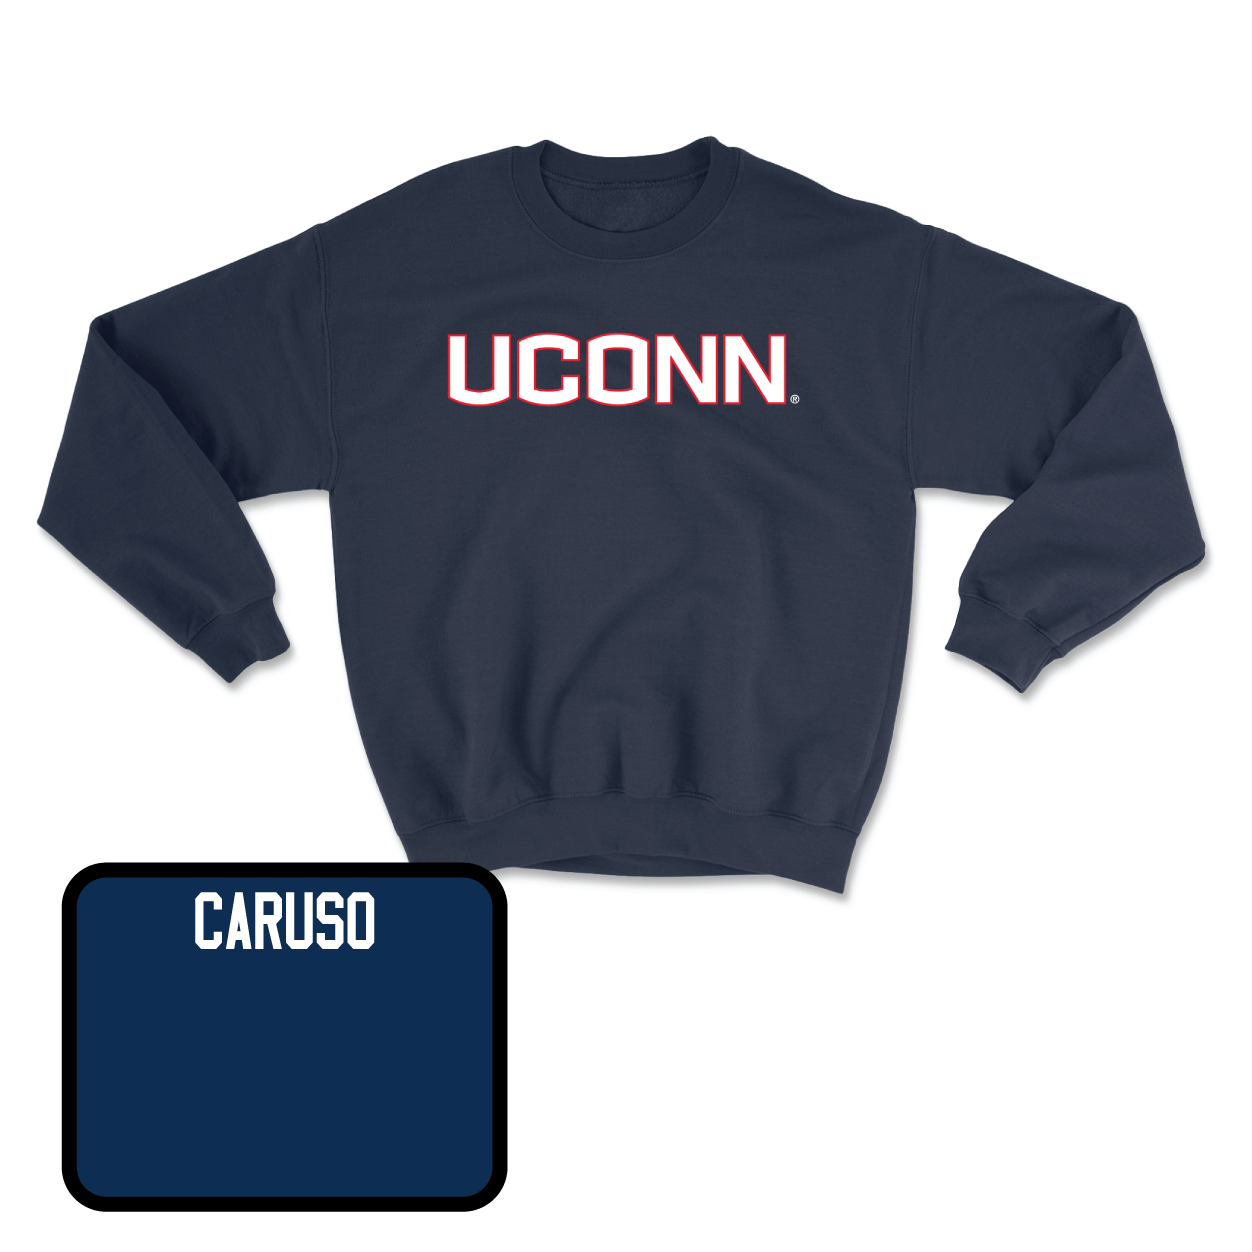 Navy Women's Rowing UConn Crewneck Large / Riley Caruso